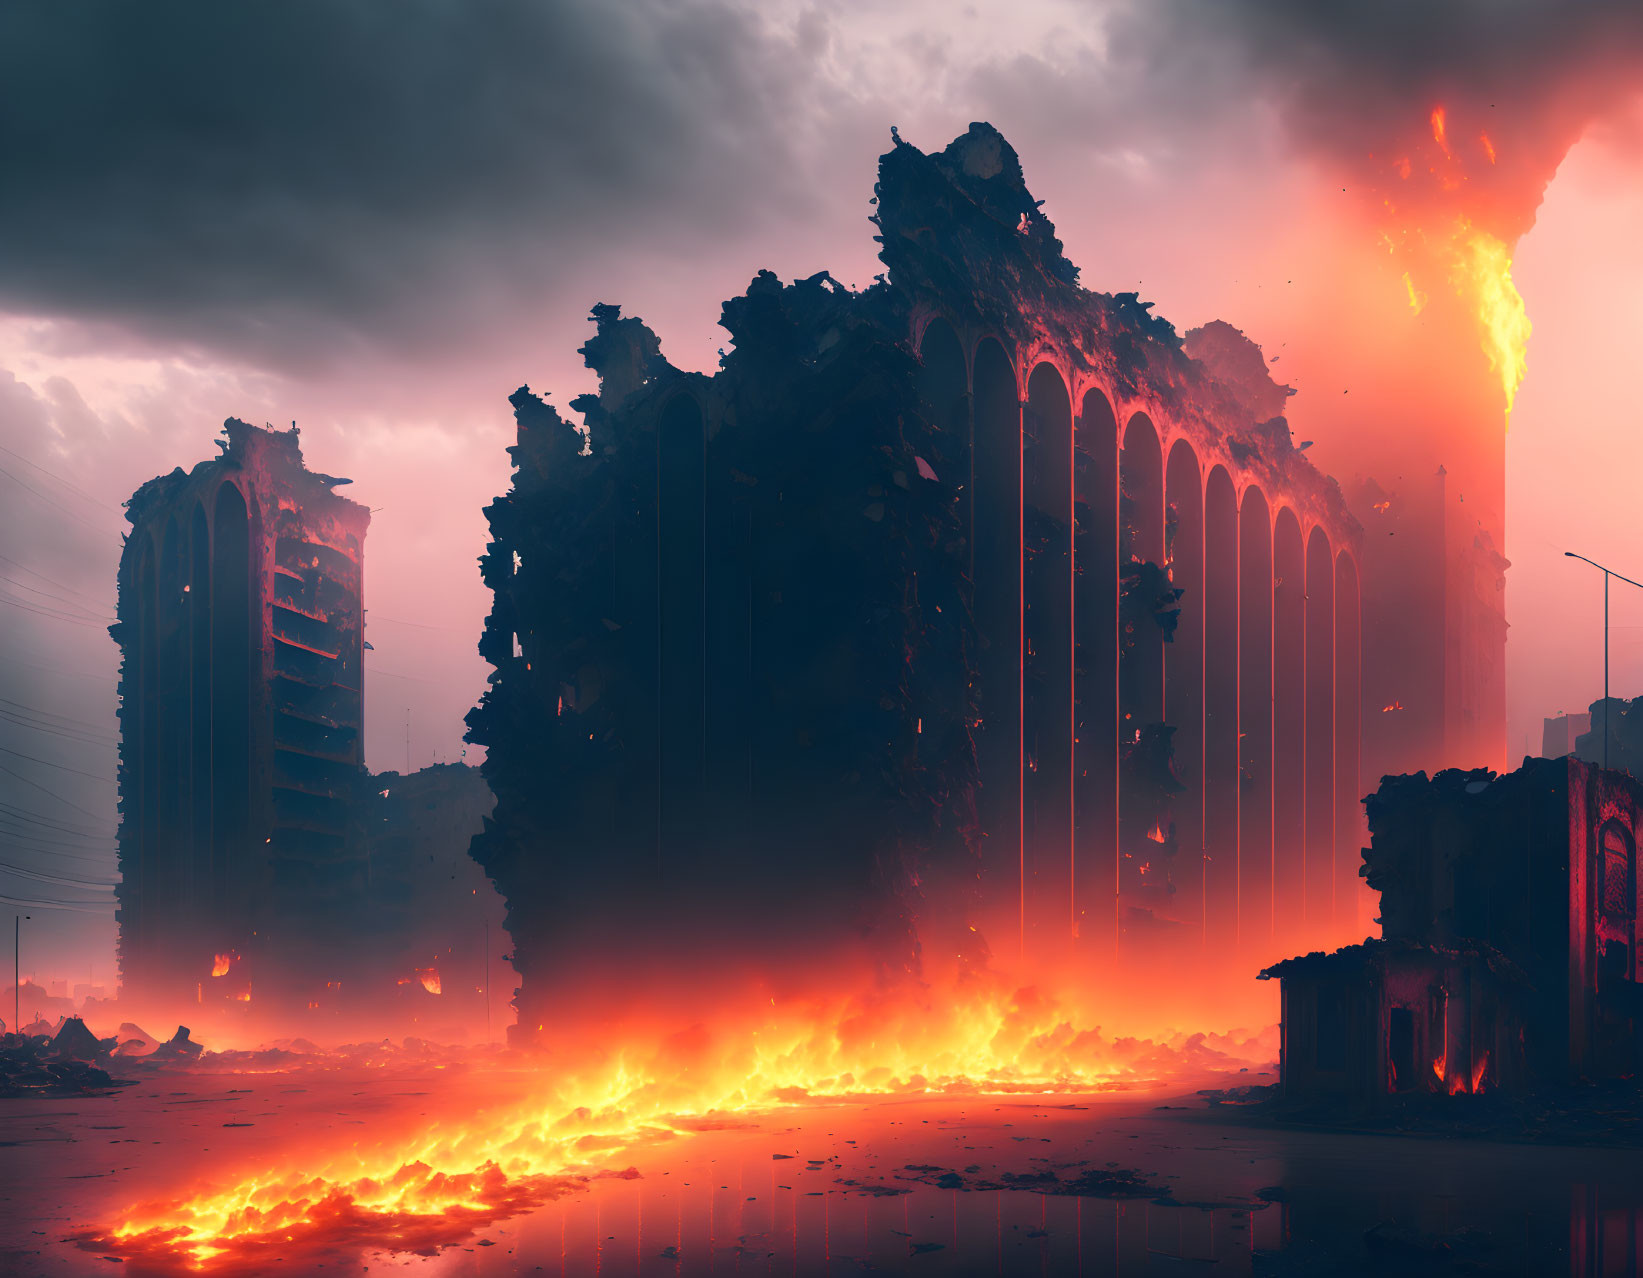 Dystopian scene with crumbling Gothic architecture and rivers of lava